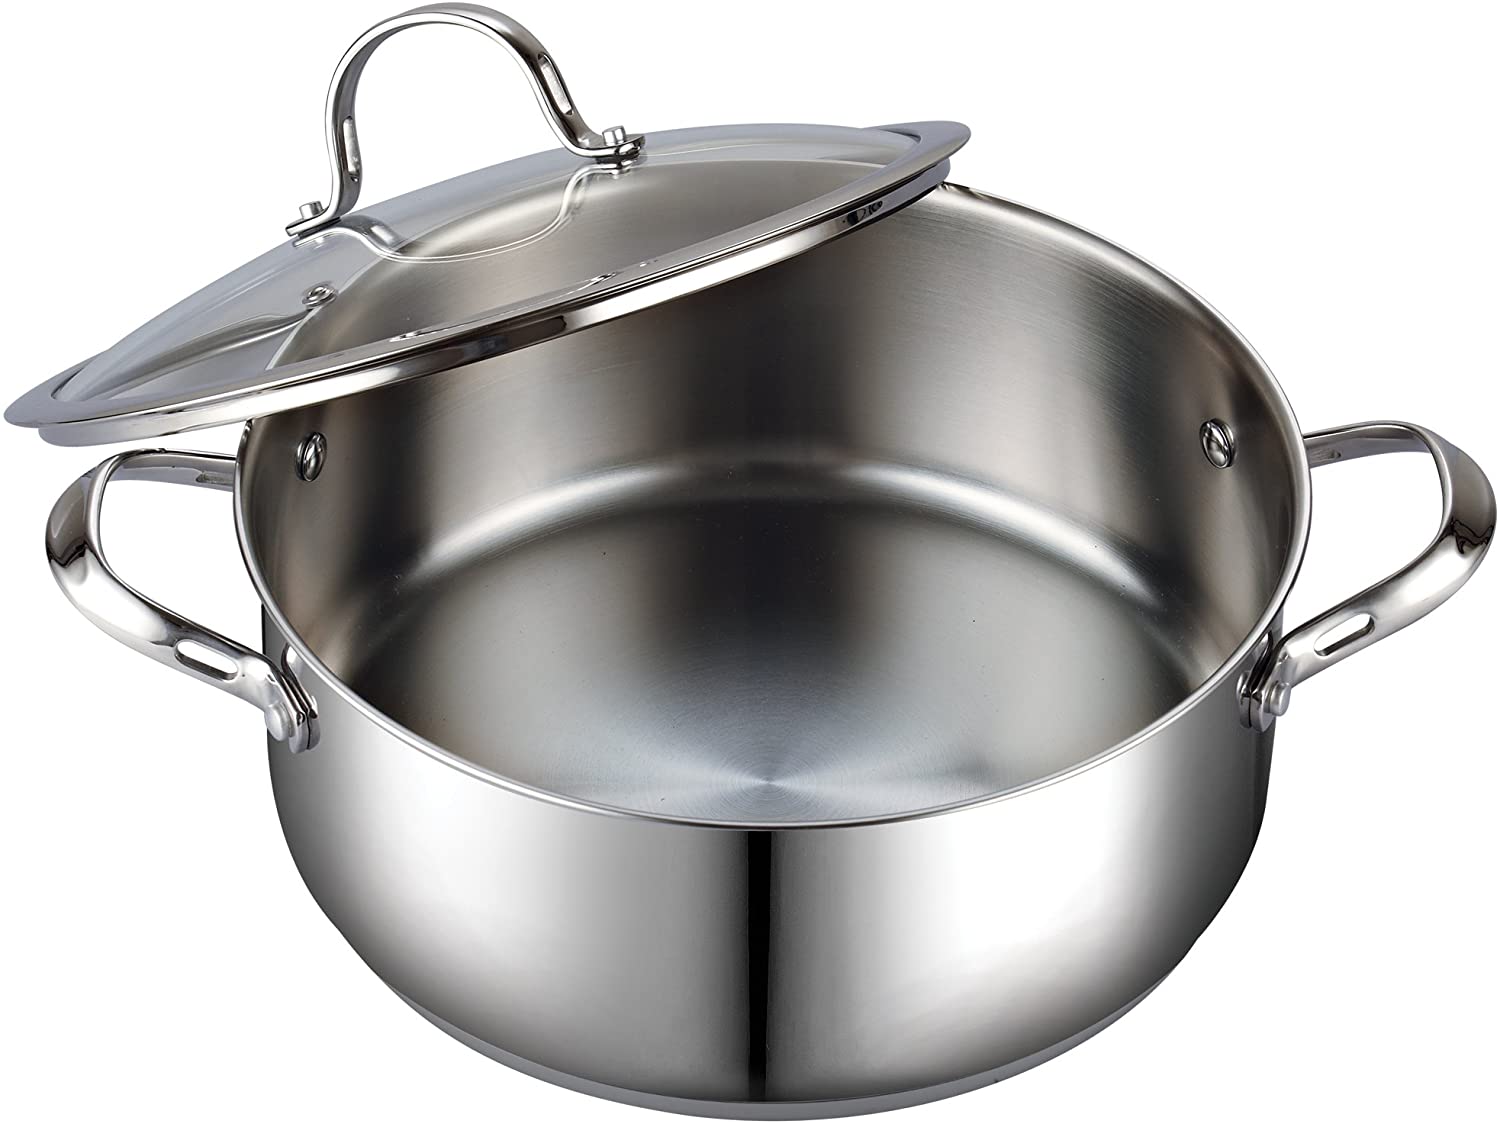 Bc Dutch Oven, with Glass Lid, Stainless Steel, 5 Quart